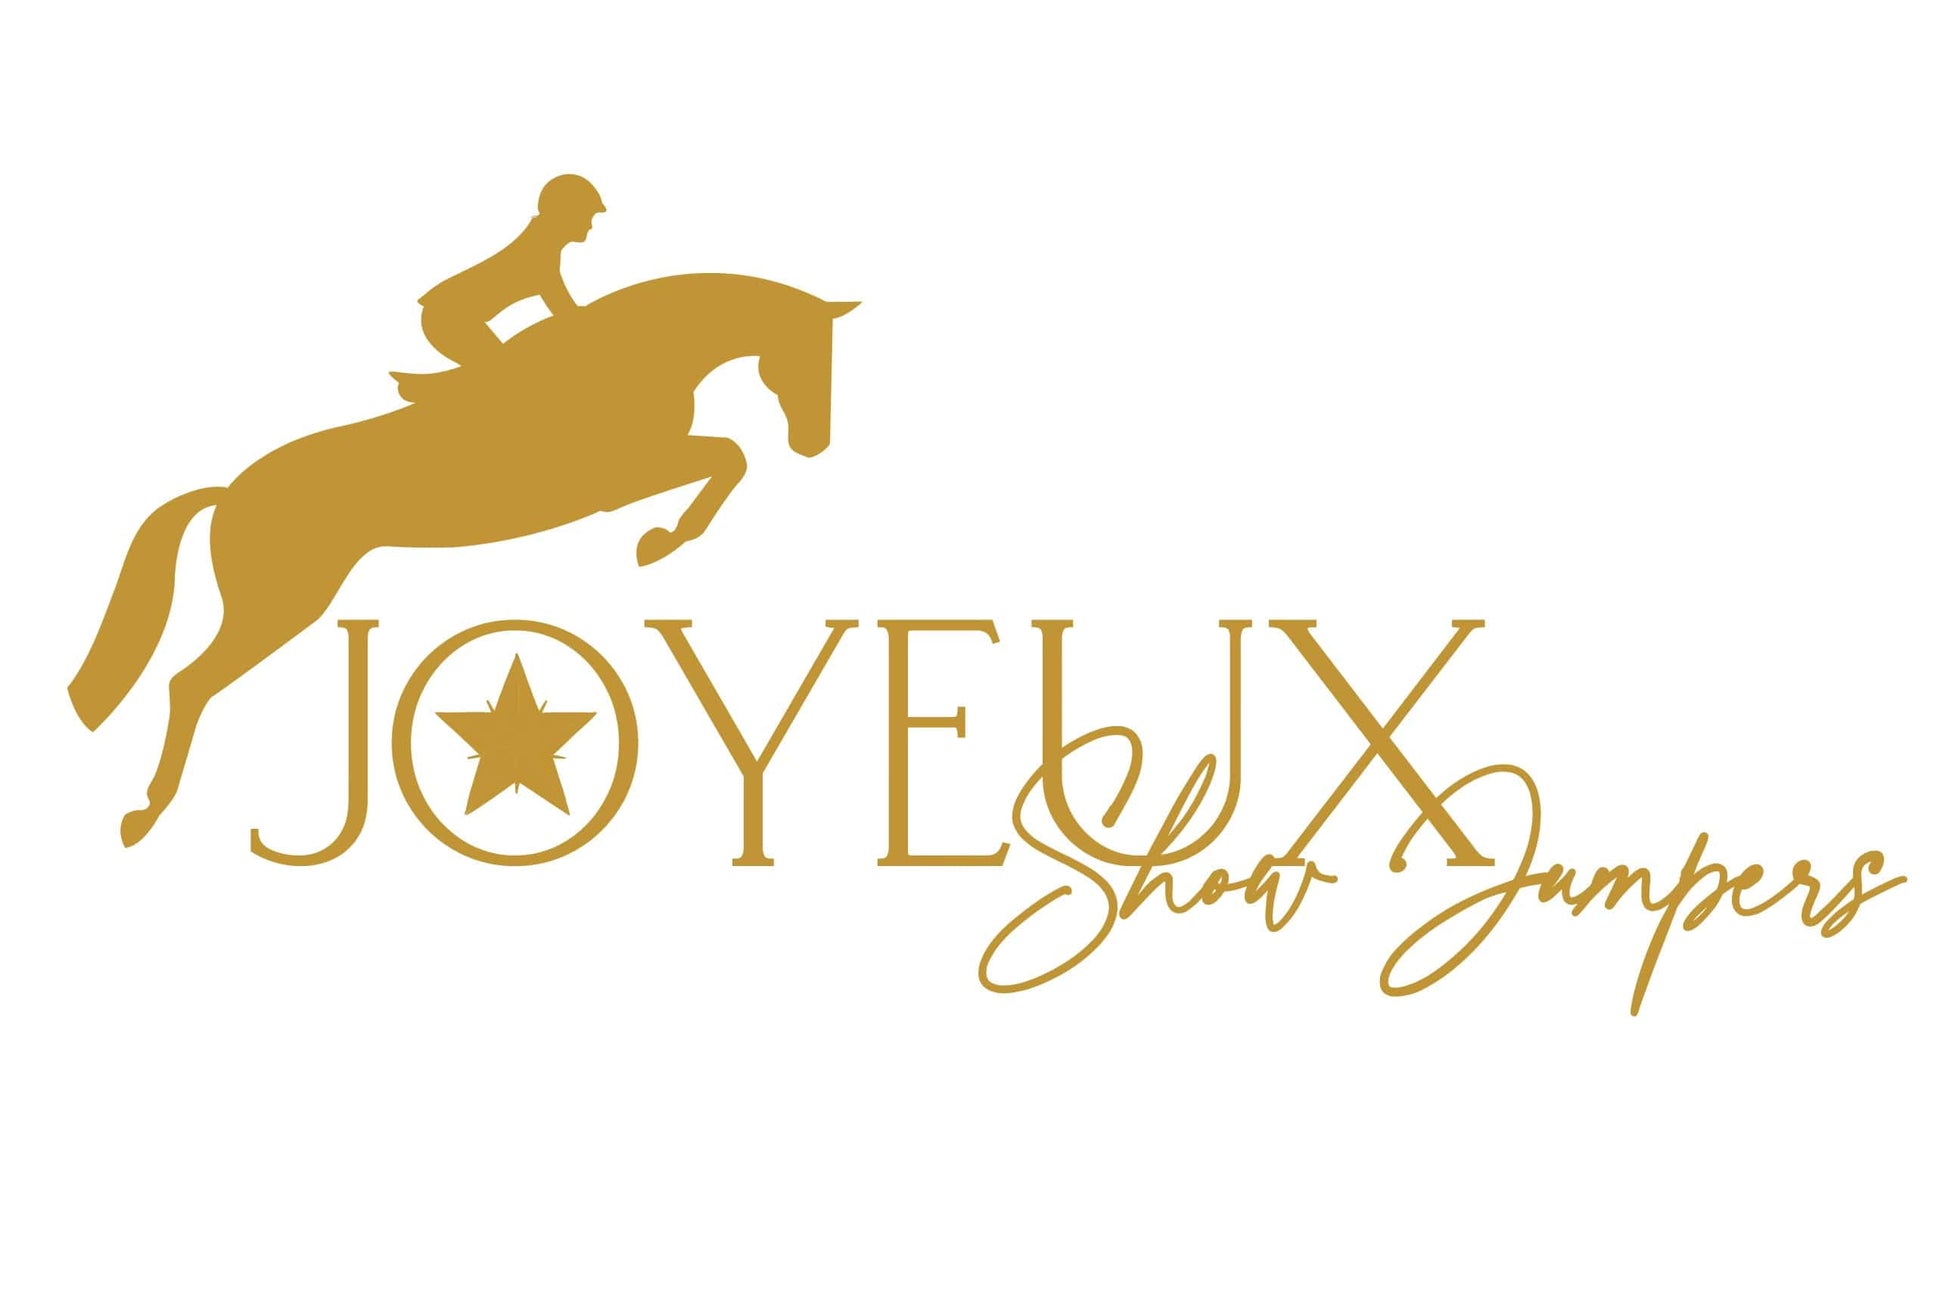 Equestrian Team Apparel Joyeux Show Stables Ladies Polo equestrian team apparel online tack store mobile tack store custom farm apparel custom show stable clothing equestrian lifestyle horse show clothing riding clothes horses equestrian tack store